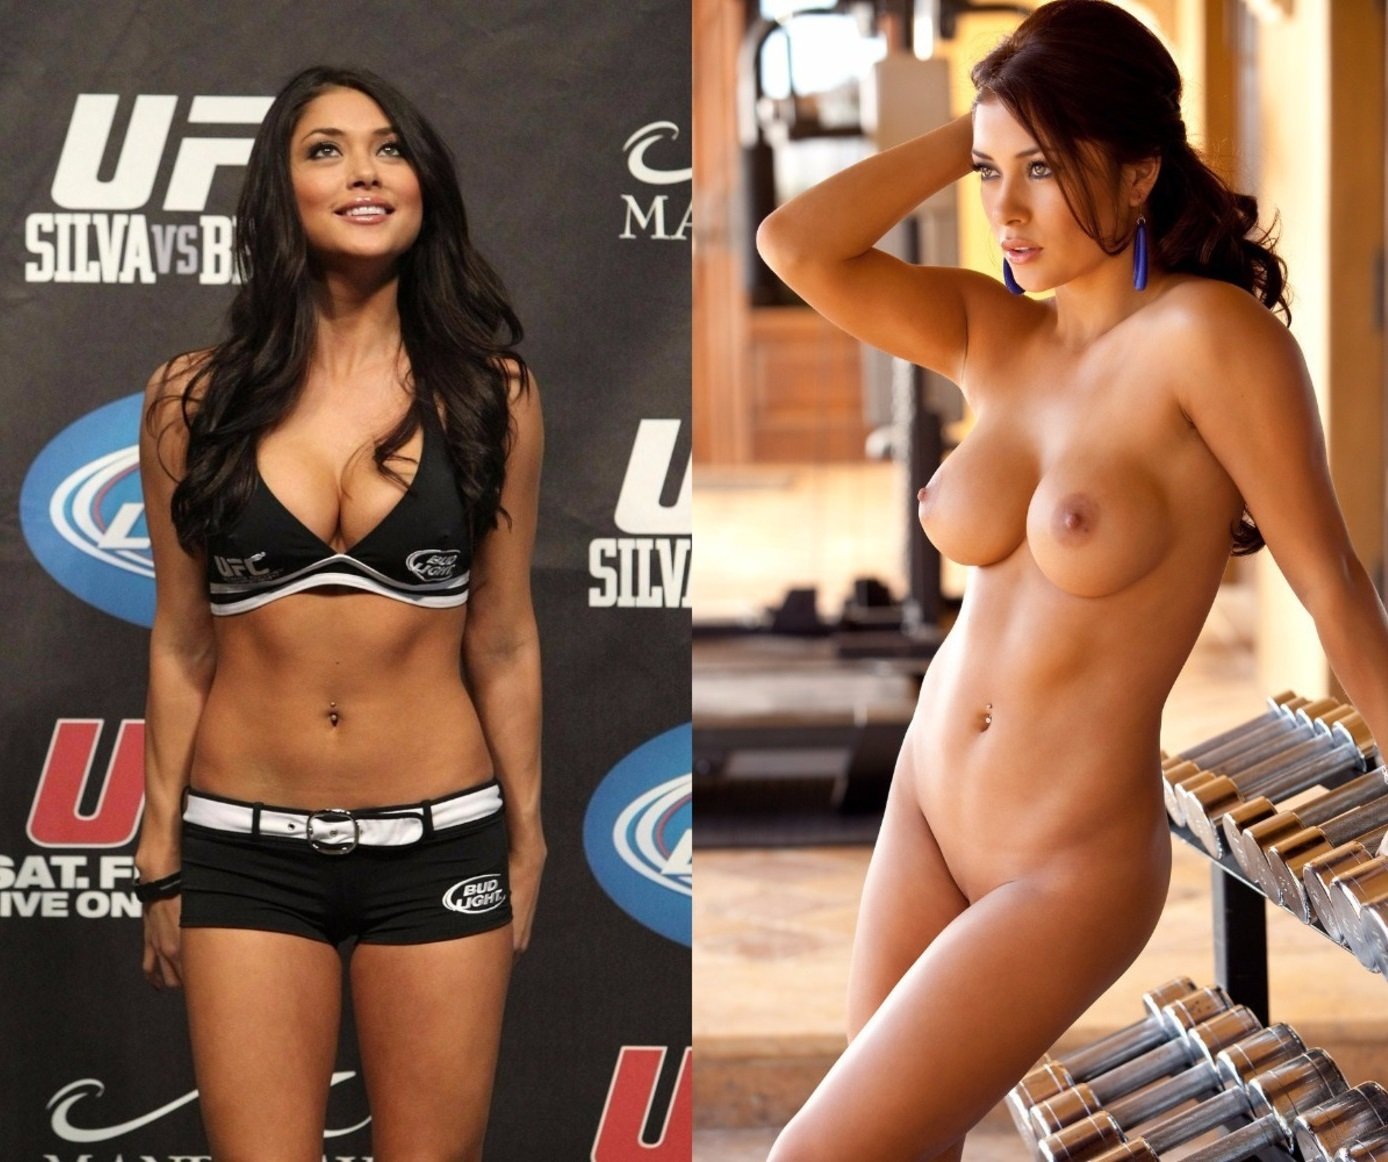 beatrice loyd recommends ufc female nude pic